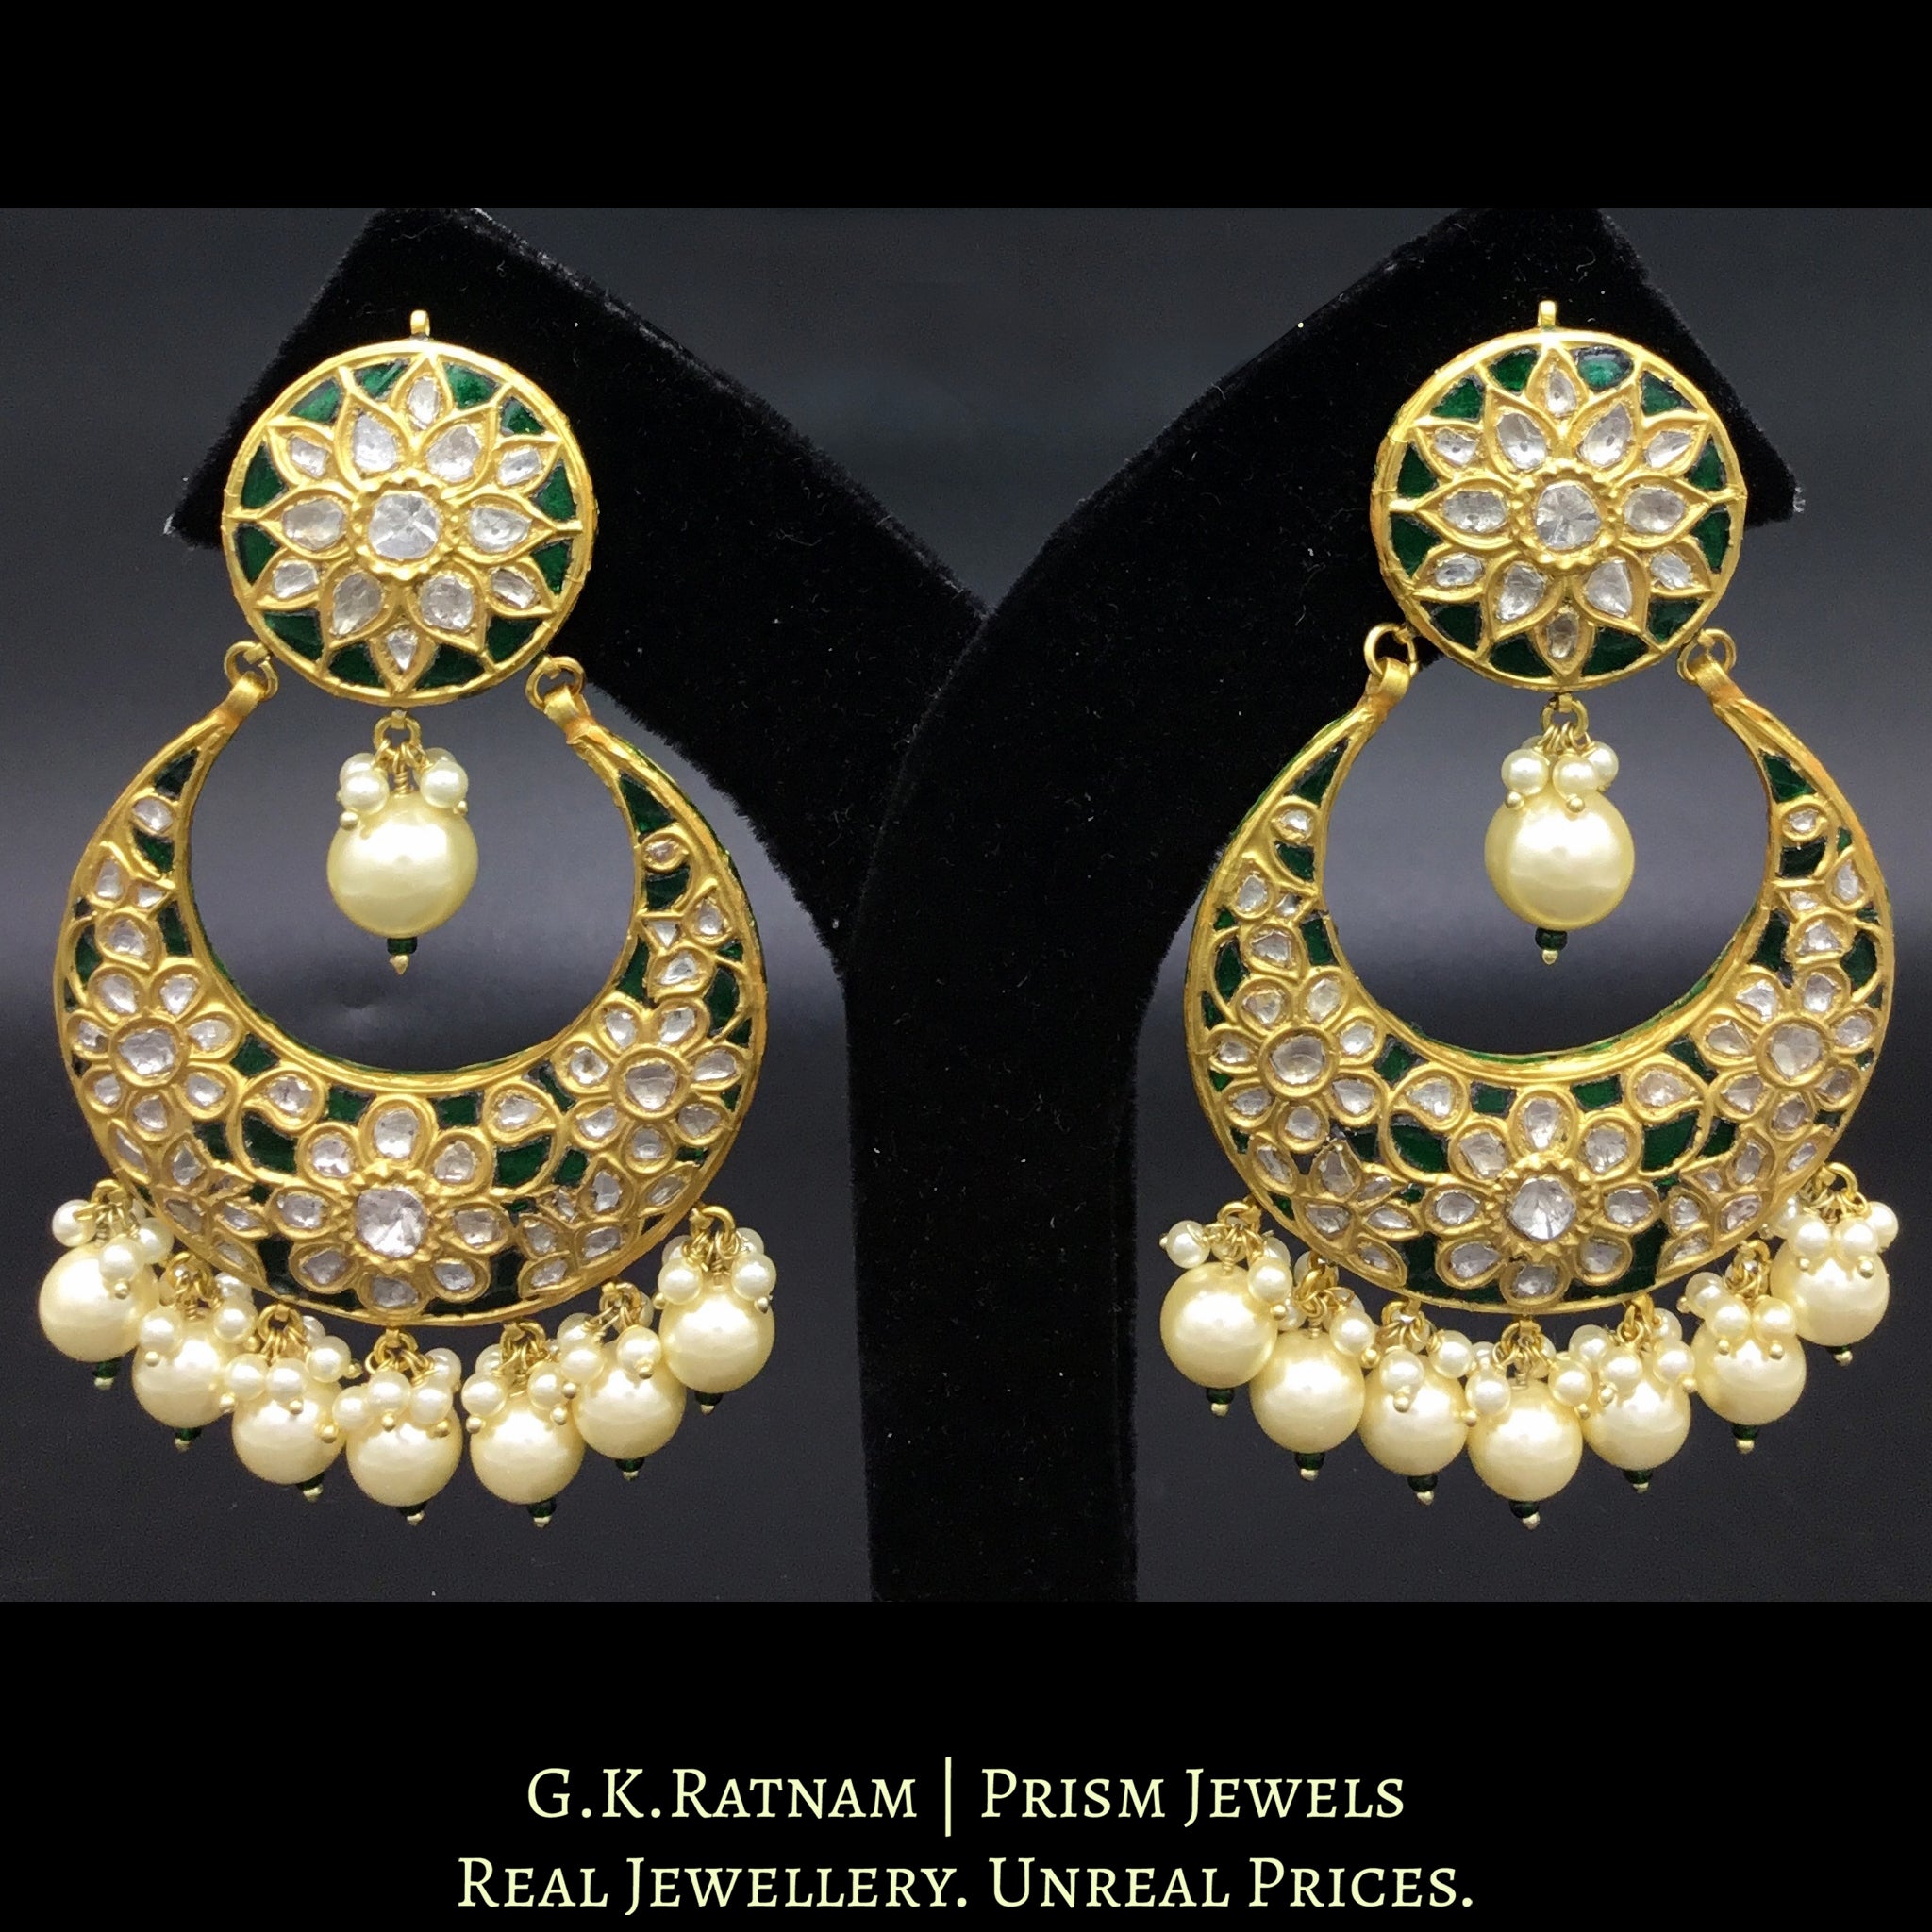 23k Gold and Diamond Polki Chand Bali Earring pair with emerald-green stones and shell pearls